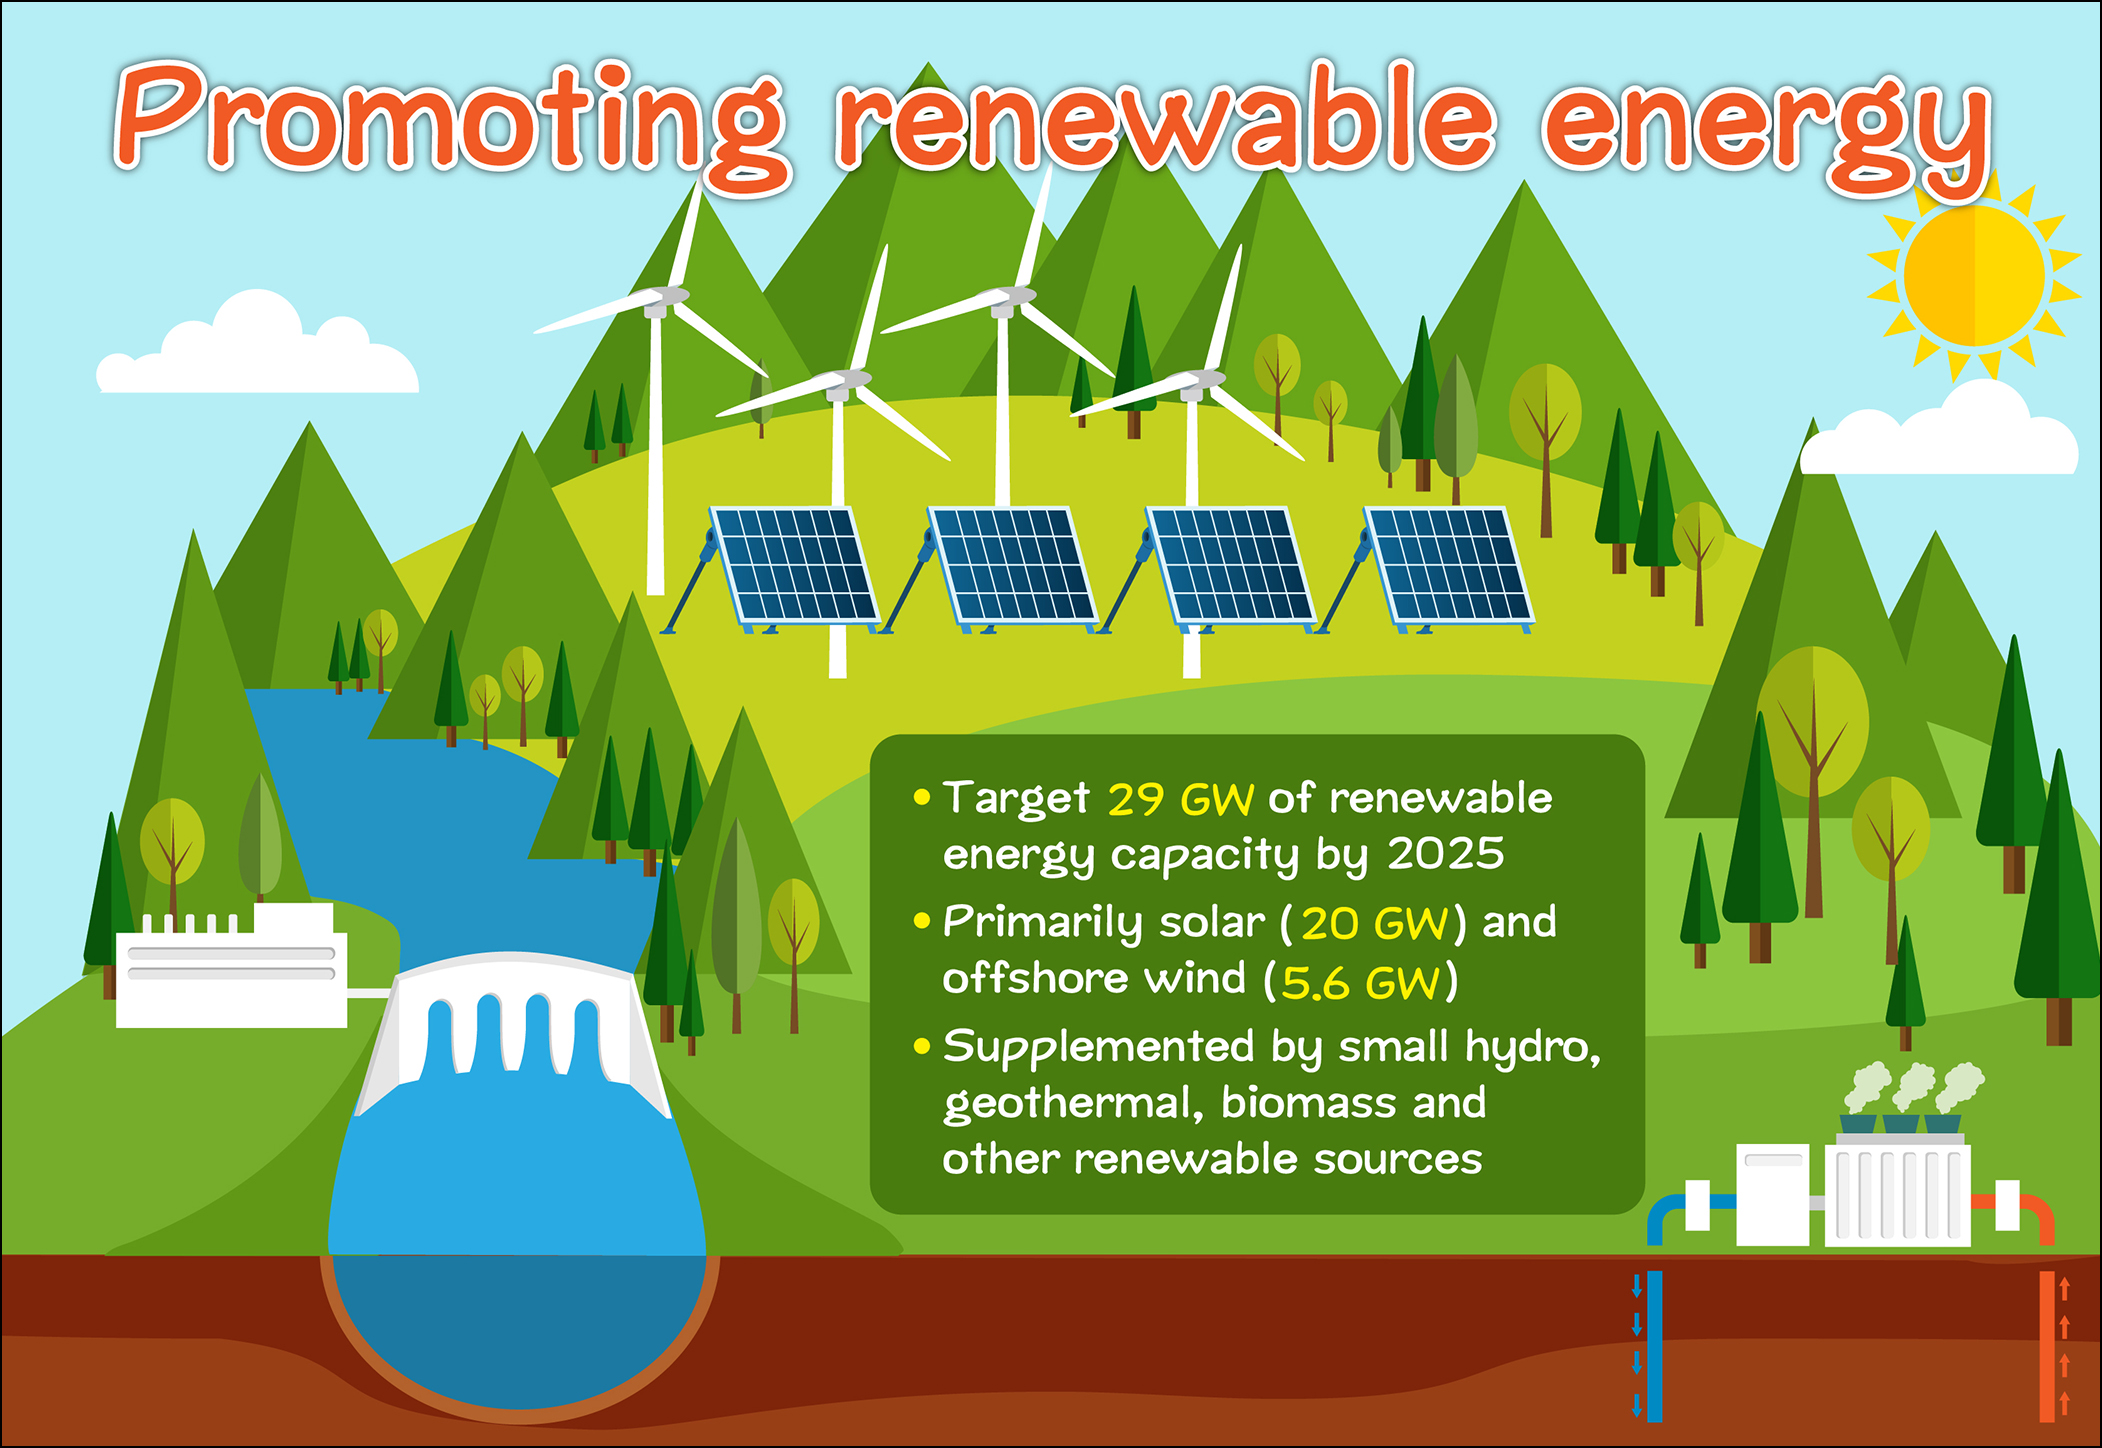 Accelerating the promotion of renewable energy